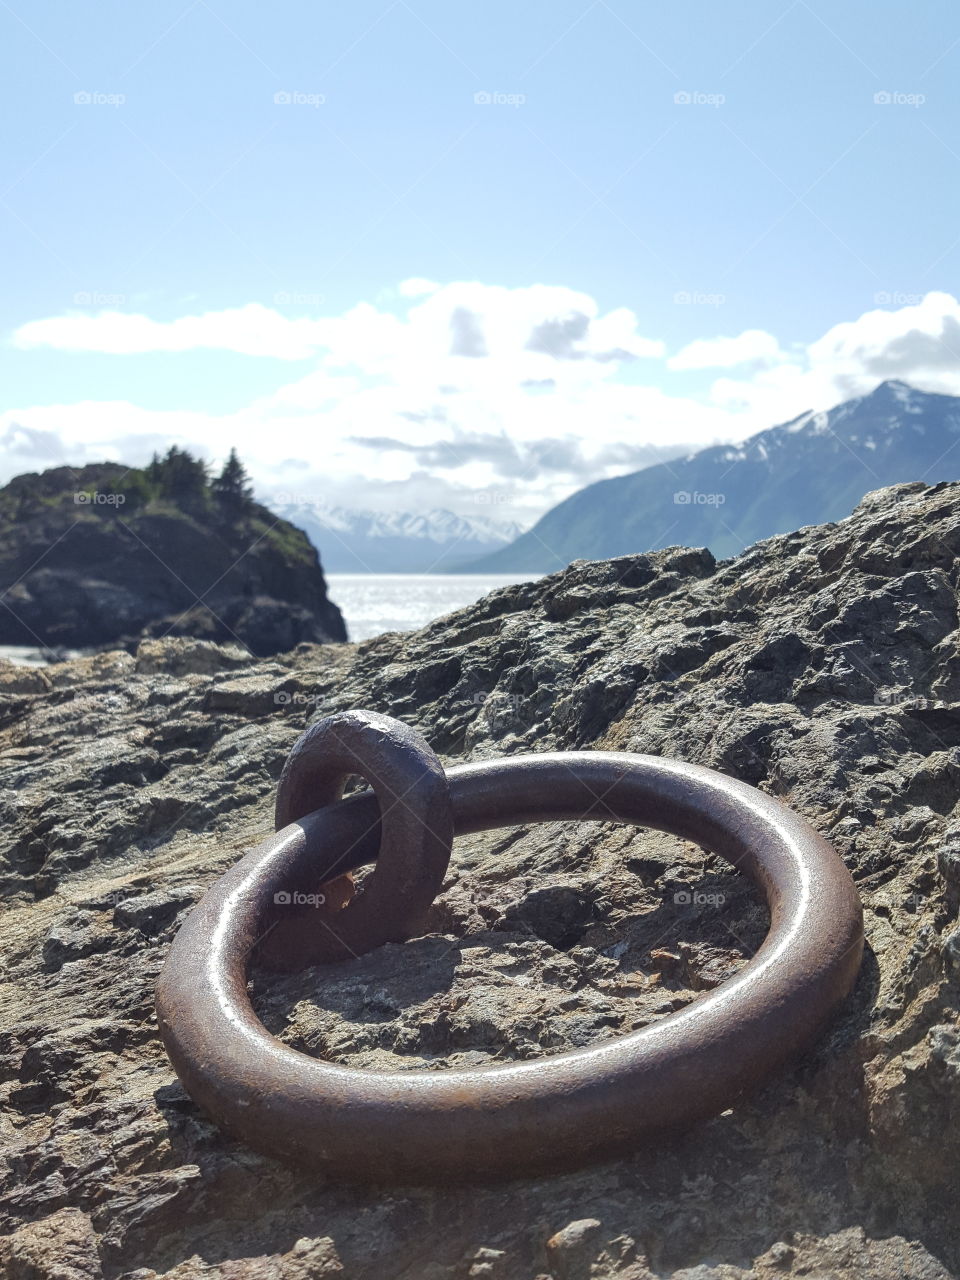 random discovery while climbing rocks during a pit stop on a solo road trip in Alaska